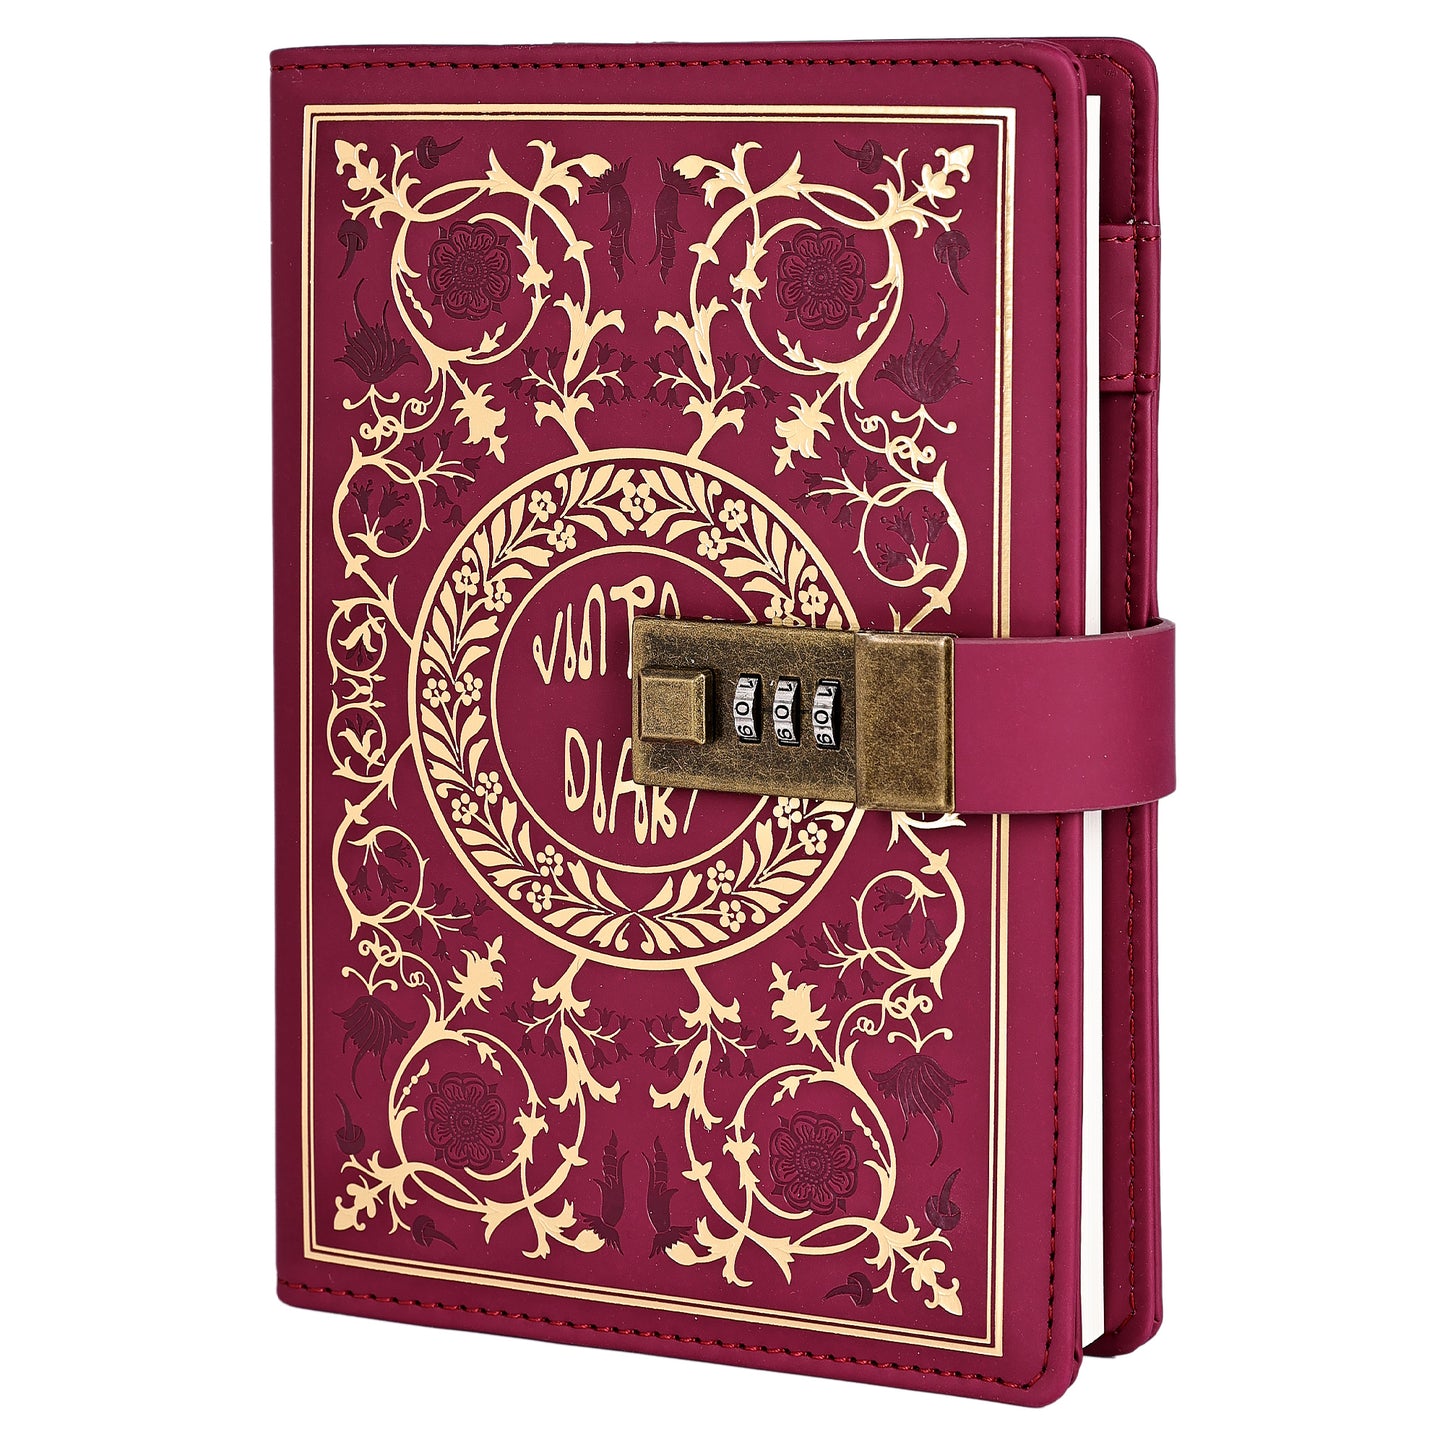 TIEFOSSI Locked Diary for Women, Vintage Flower Journal with Combination Lock B6 Writing Secret Notebook for Girls,  Refillable Ruled Lined Paper - tiefossi